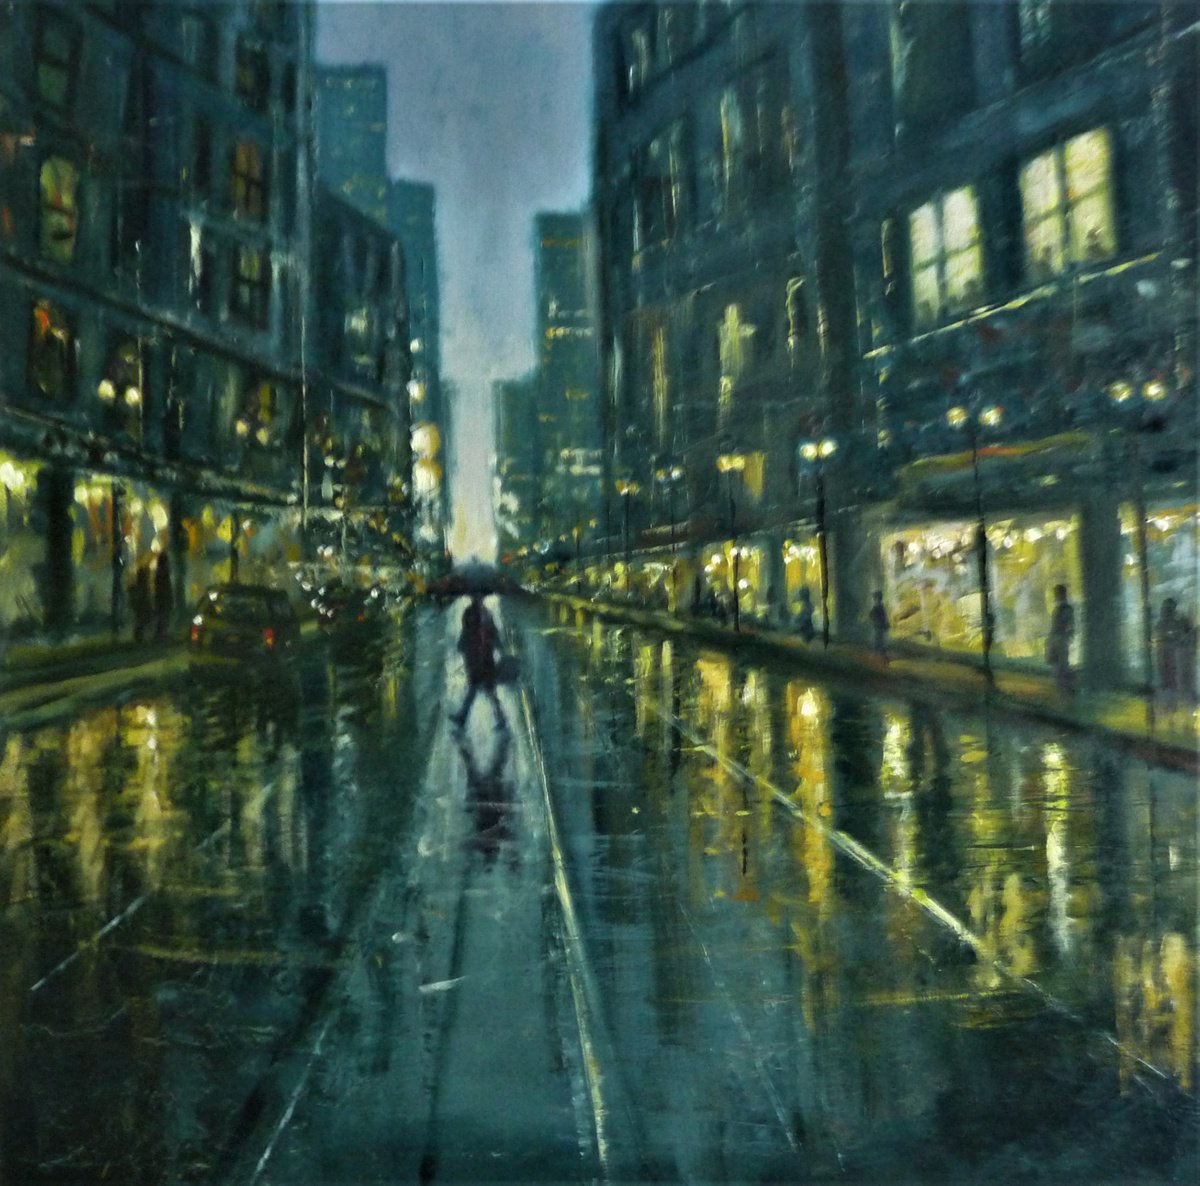 Wet Night in the City by Martin J Leighton